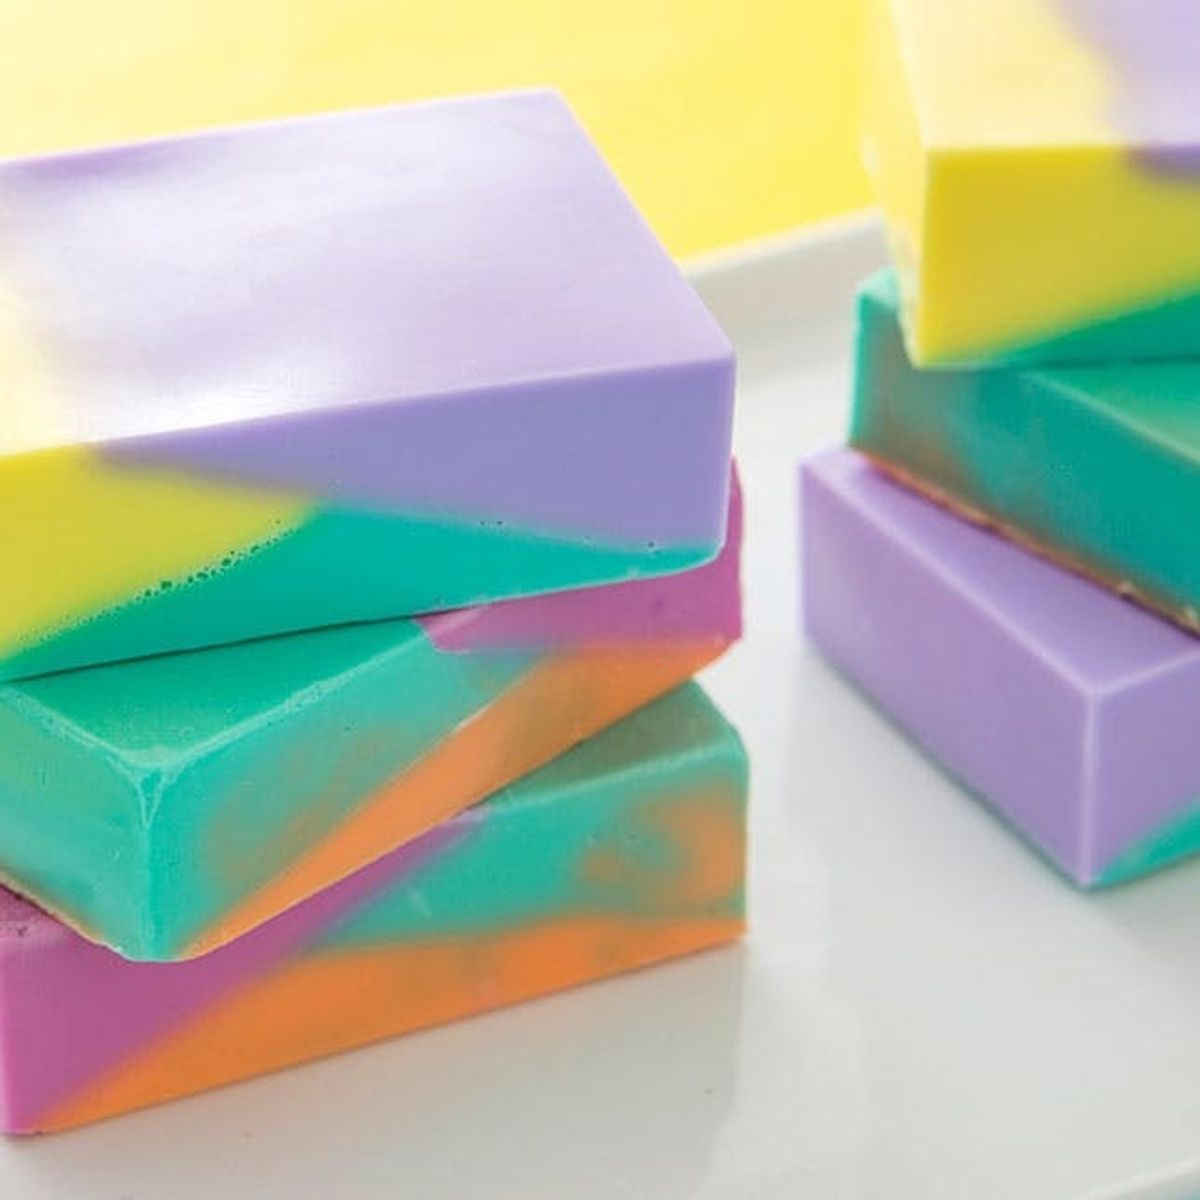 How to Make Modern Color Block Soap